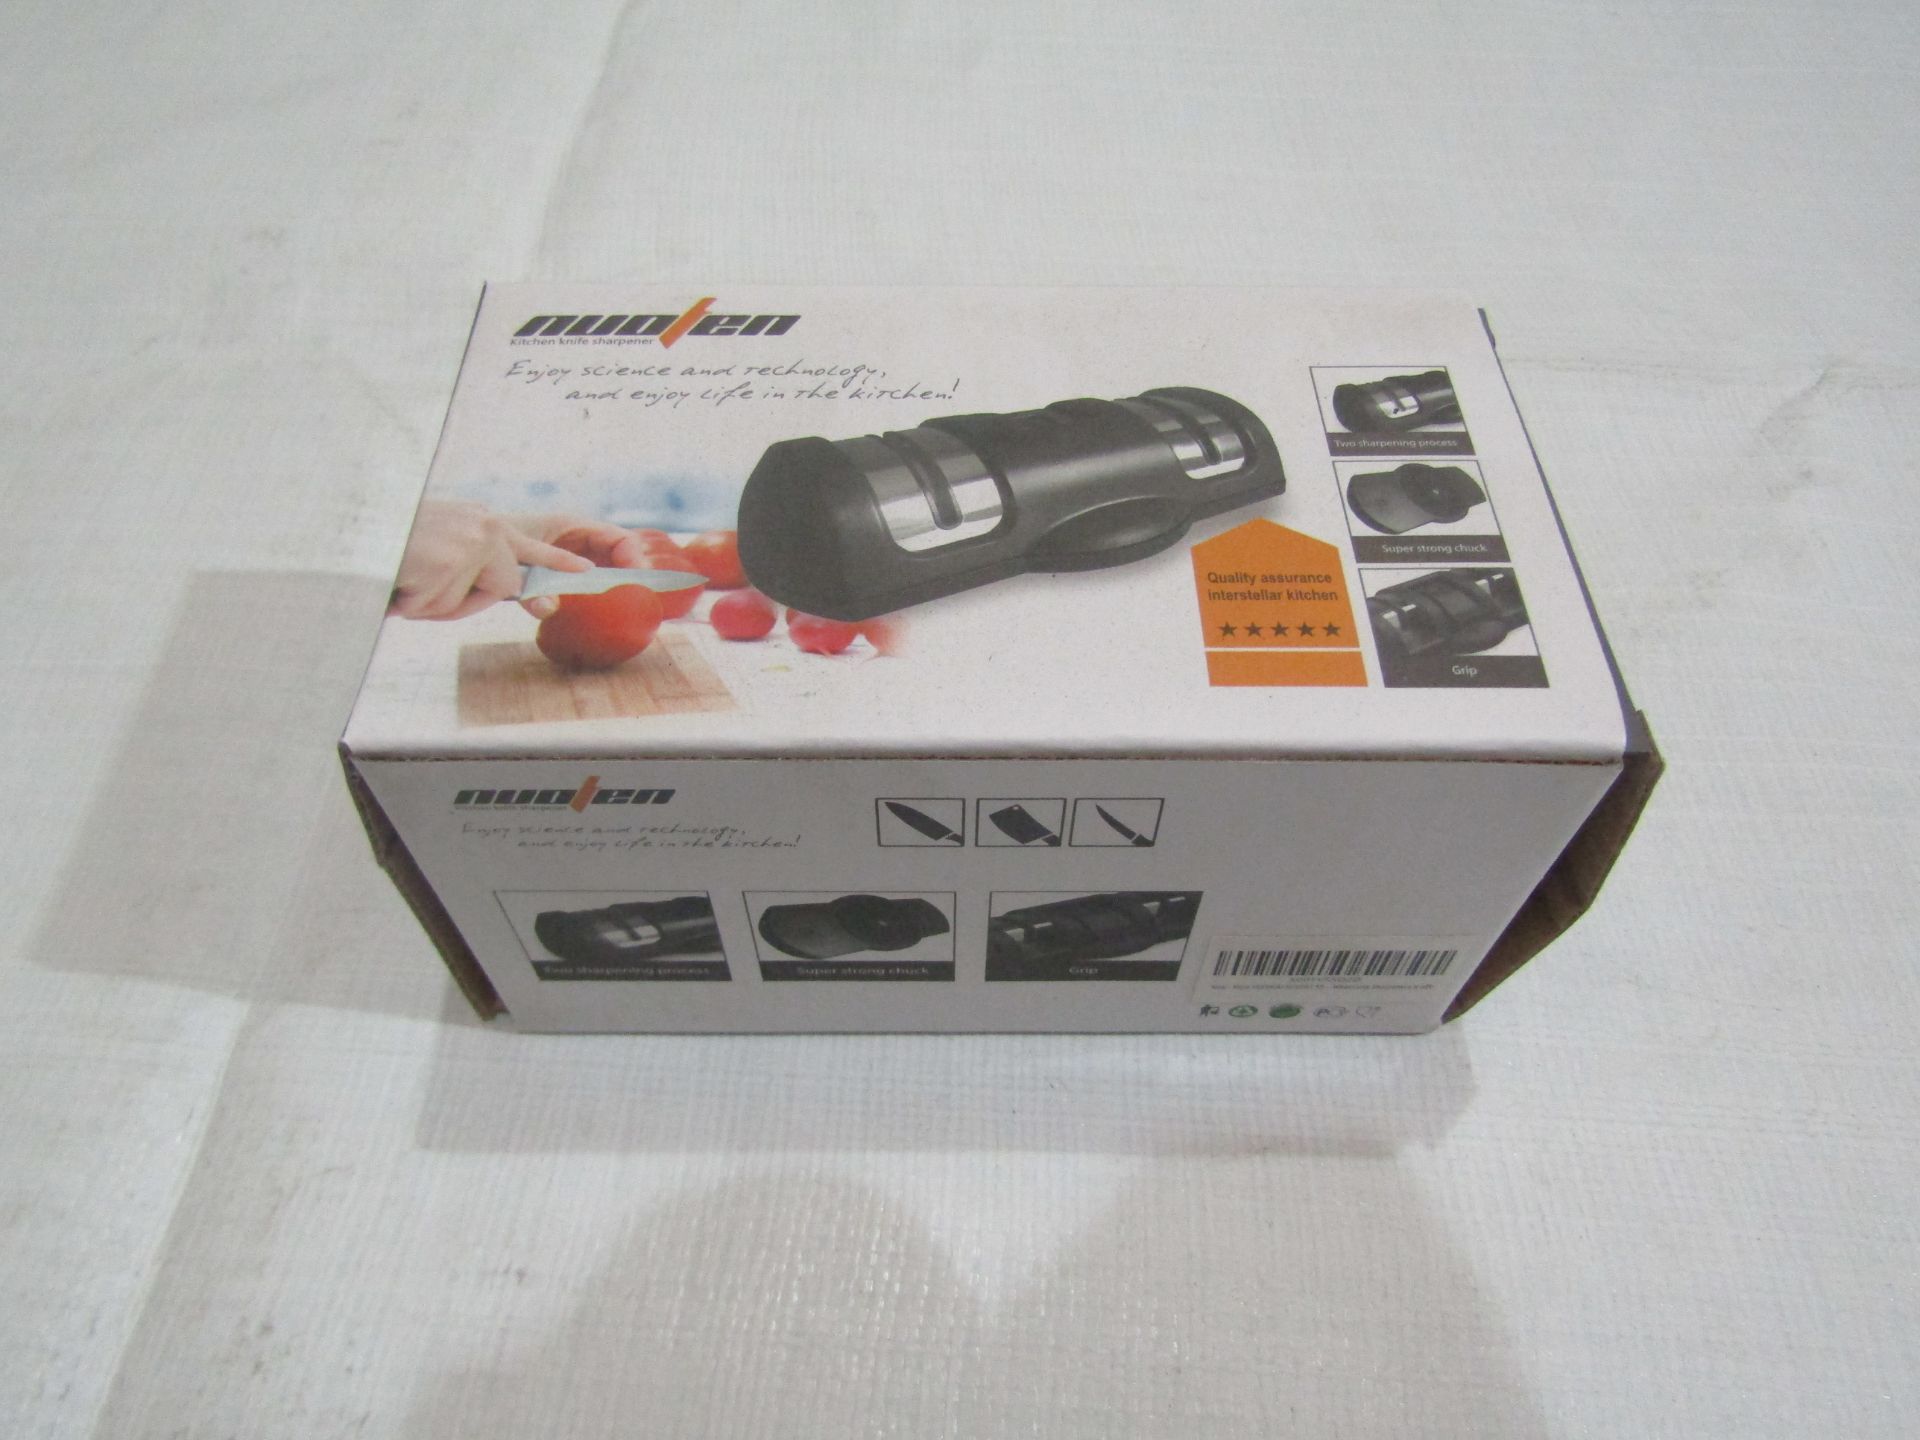 2x Nuolen Kitchen Knife Sharpener With 2 Part Sharpening Process - Good Condition & Boxed.